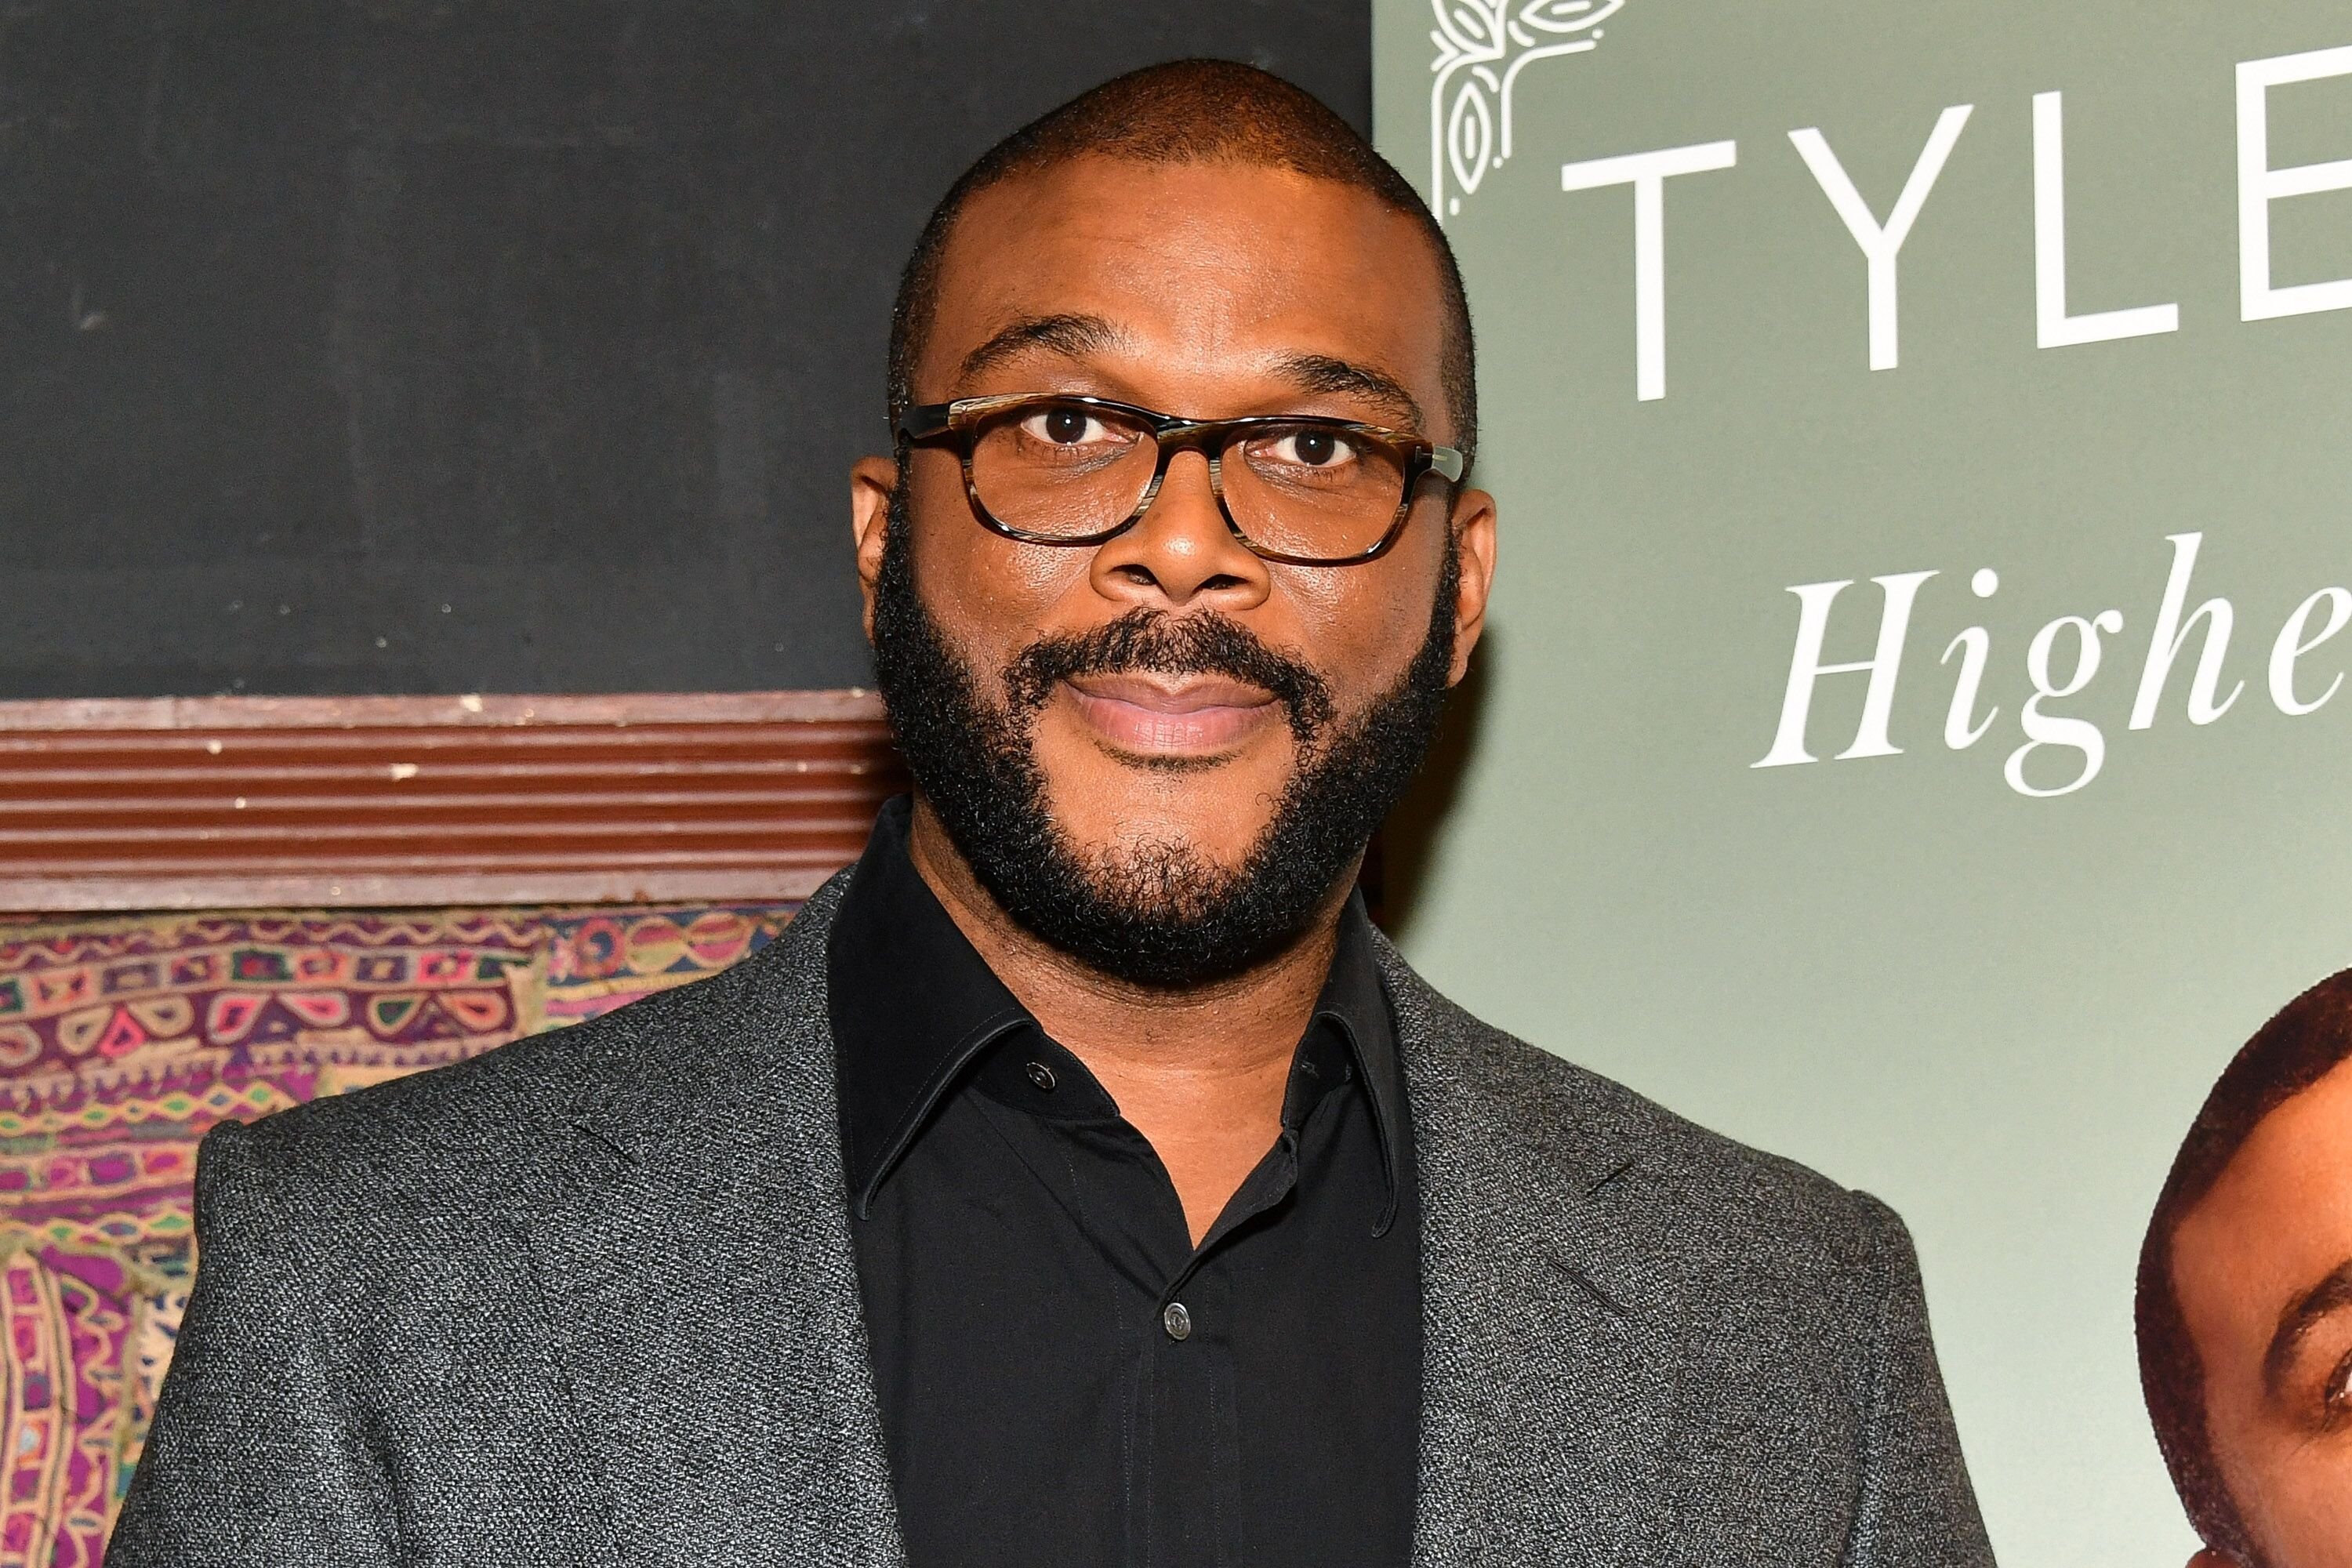 Tyler Perry launches his new book "Higher Is Waiting" at the Gramercy Theatre in New York City | Photo: Getty Images